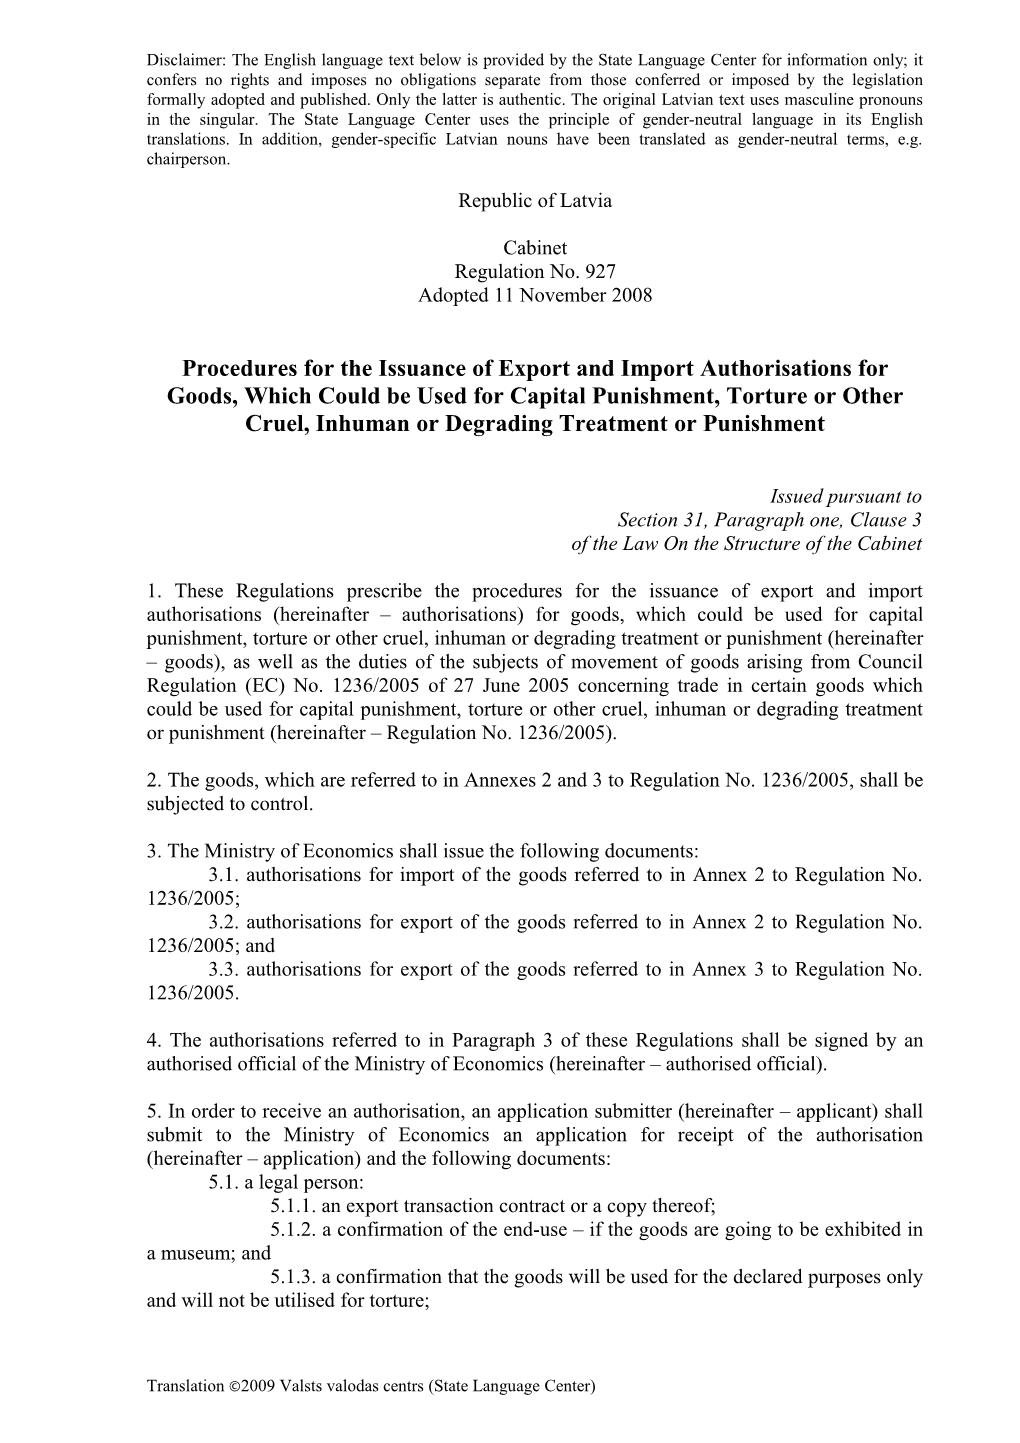 Procedures for the Issuance of Export and Import Authorisations for Goods, Which Could